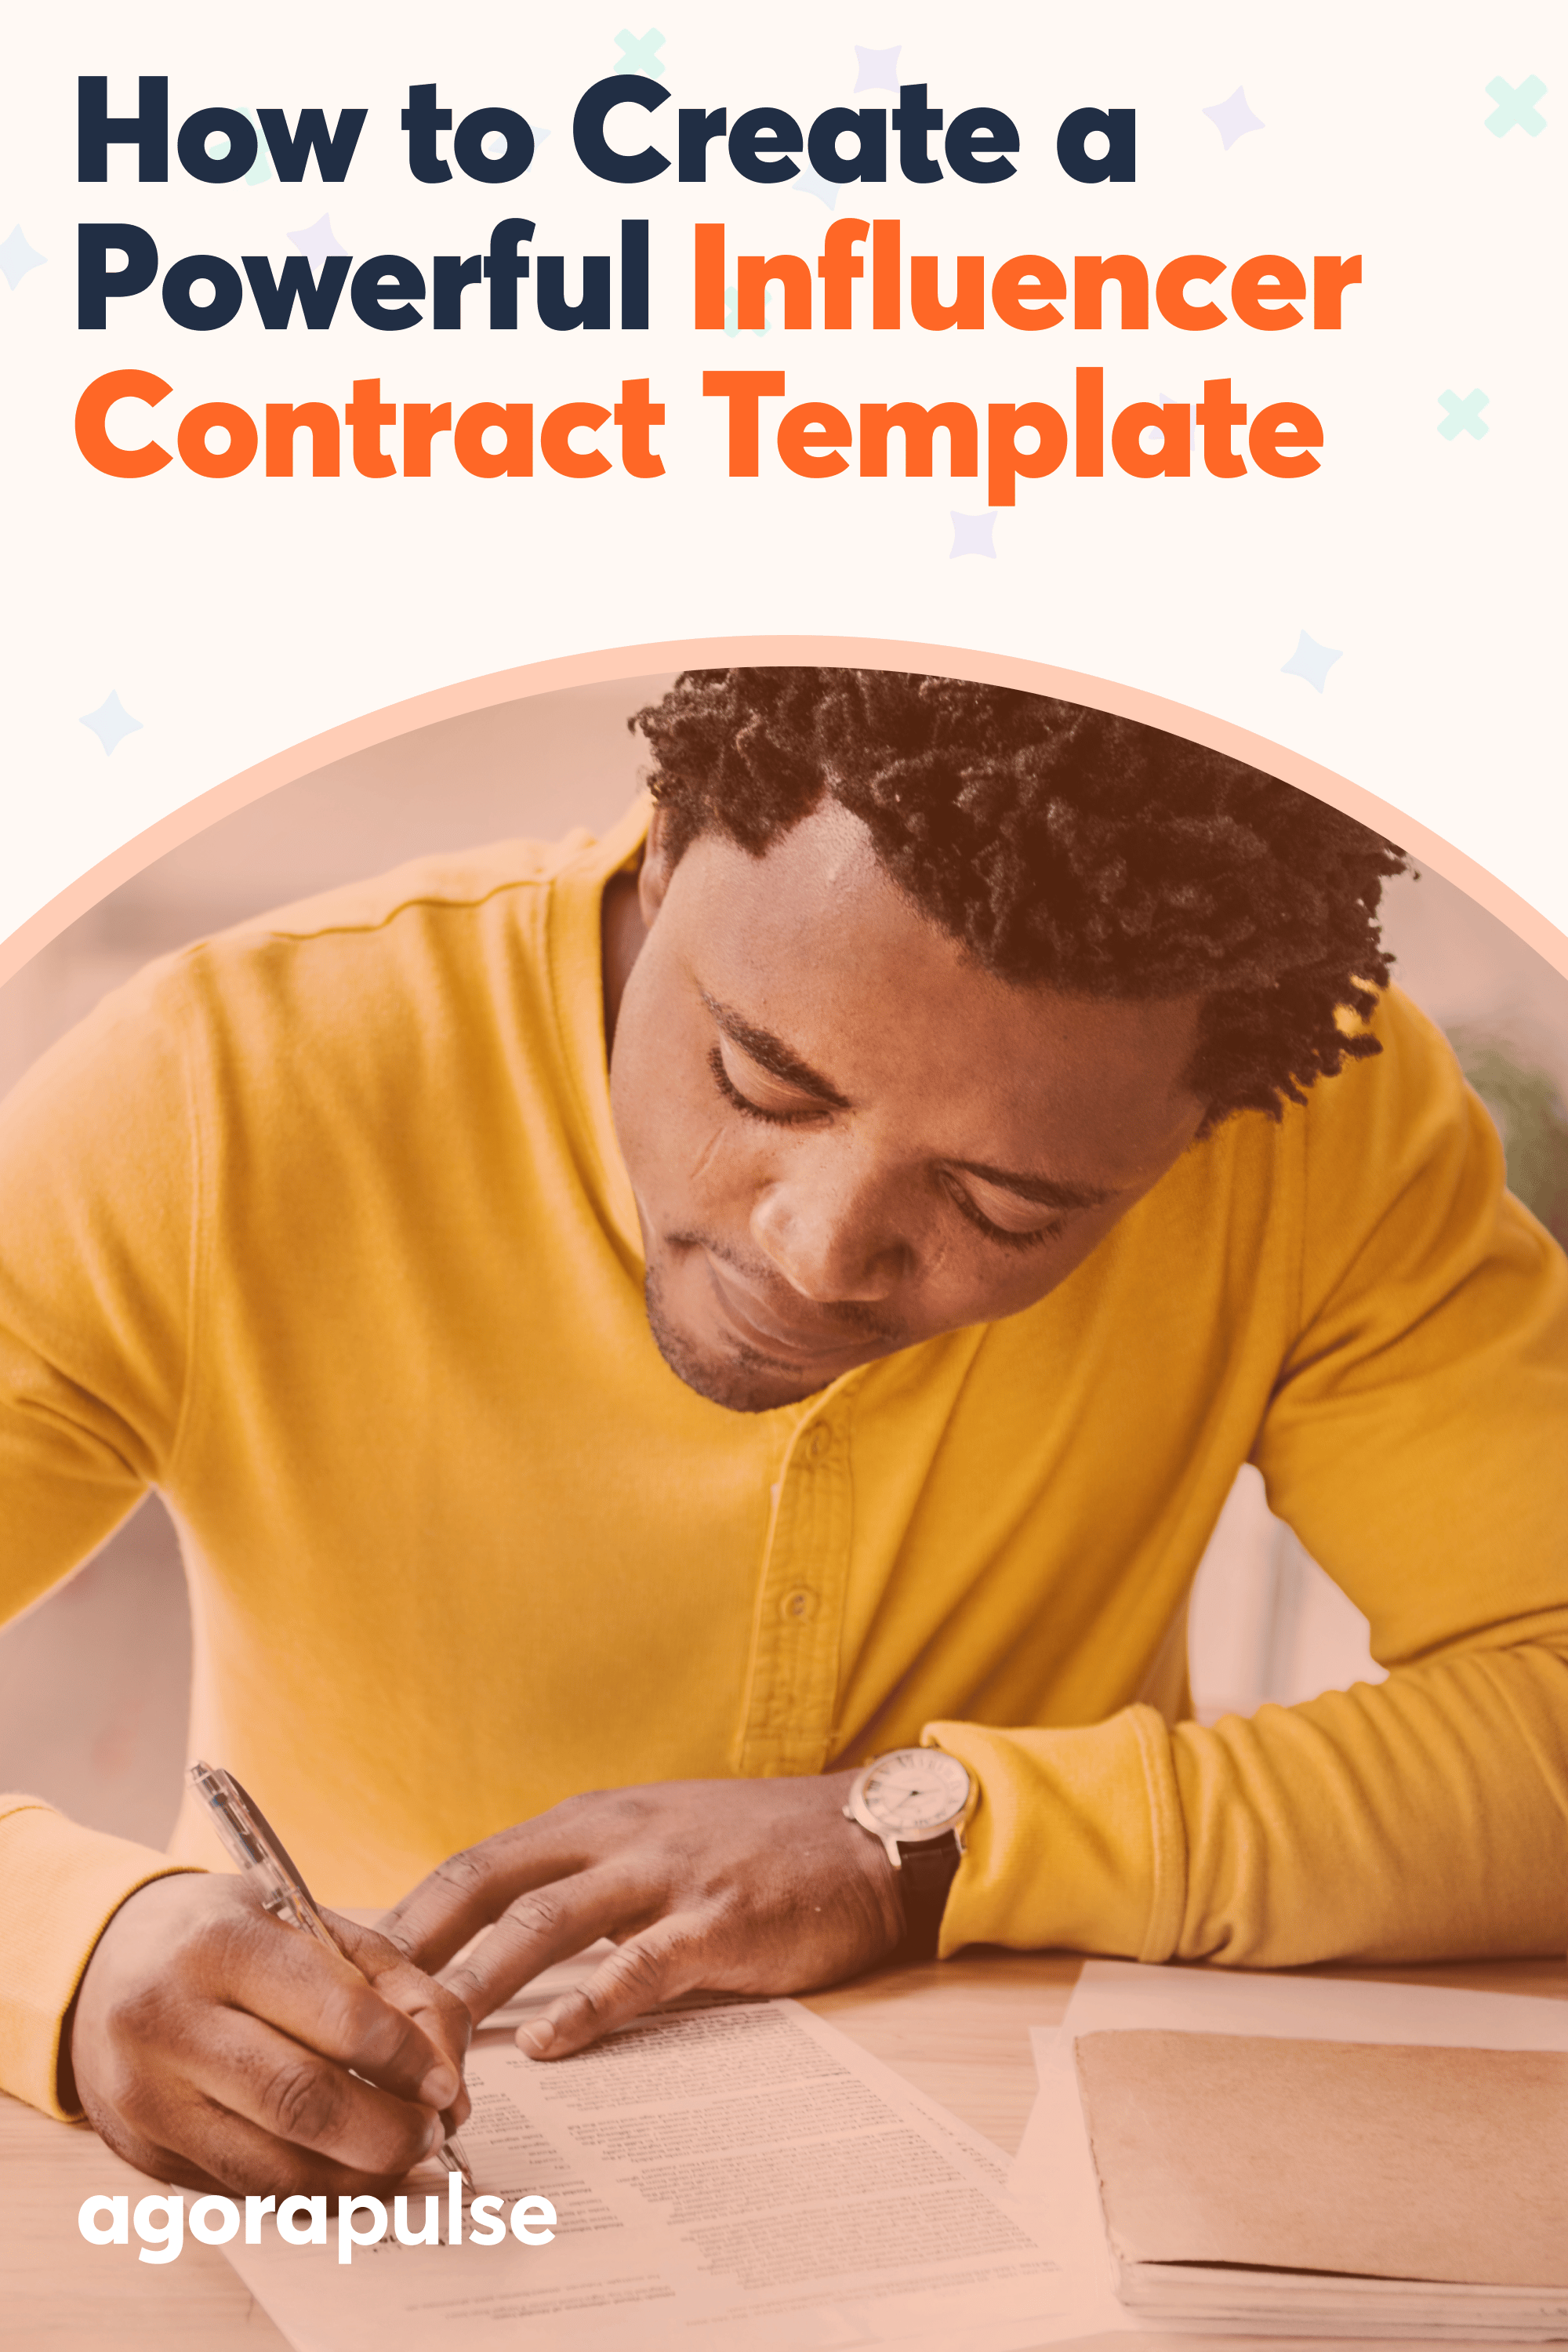 How to Create a Powerful Influencer Contract Template